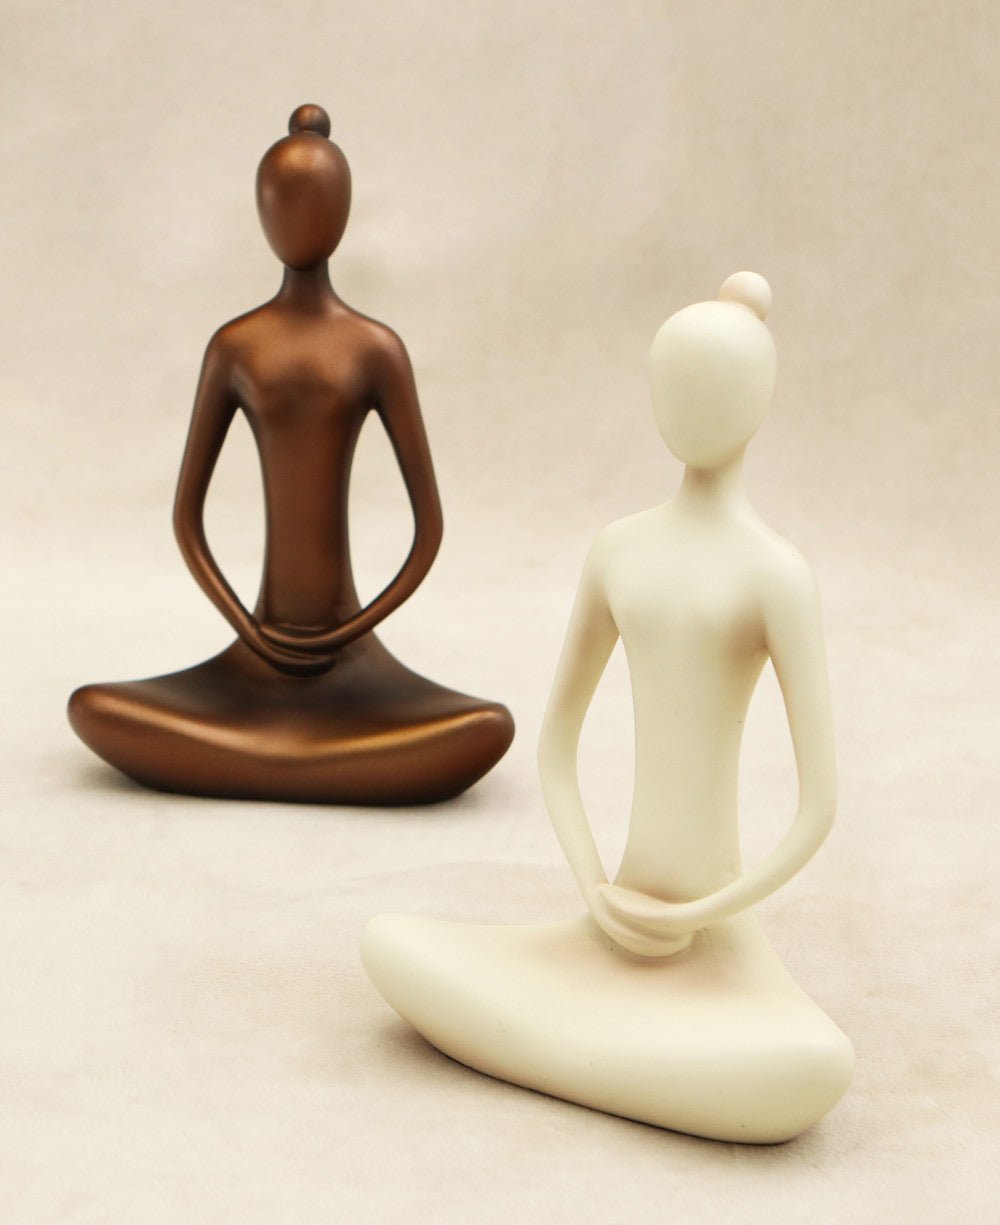 Yoga Figure Figurine Ornament for Home, Zen Buddhist Namaste Yoga Statue  Sculpture Indoor & Outdoor Decor for Birthday Mothers Day